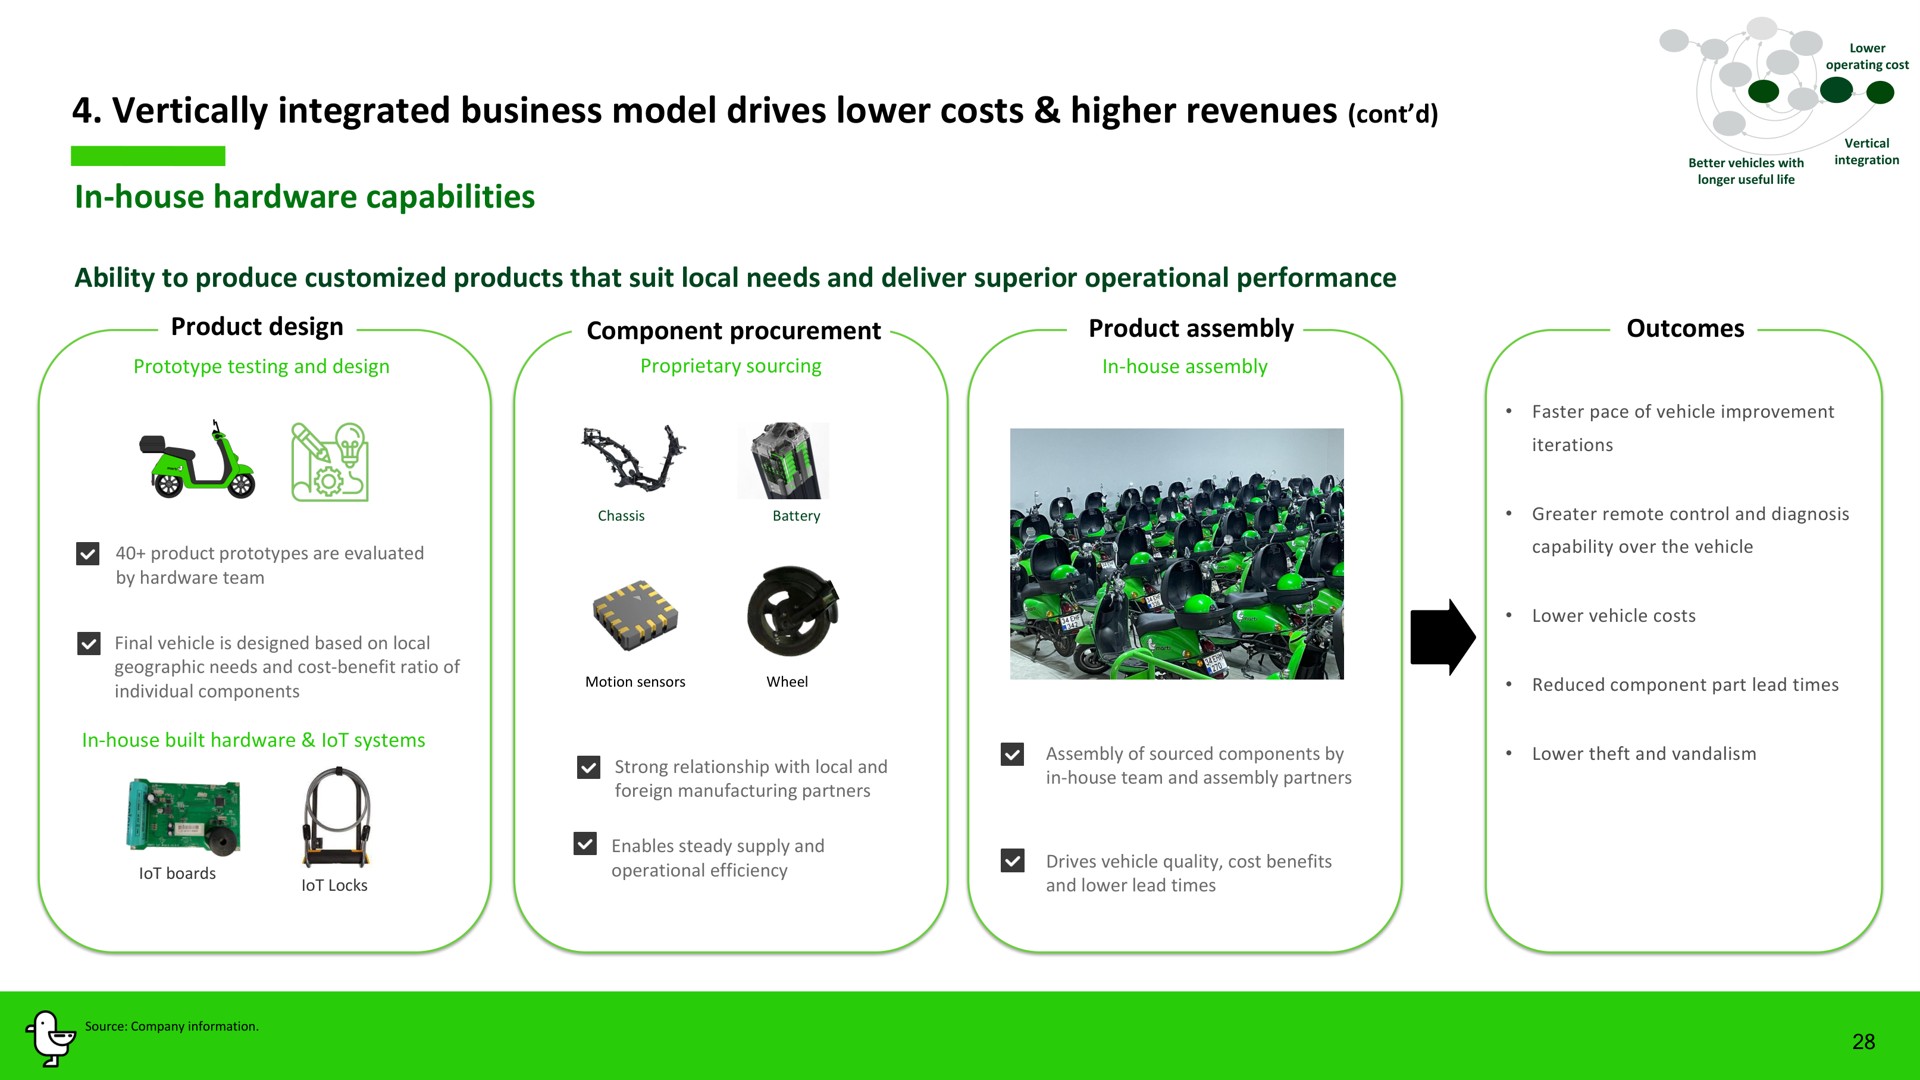 vertically integrated business model drives lower costs higher revenues in house hardware capabilities | Marti